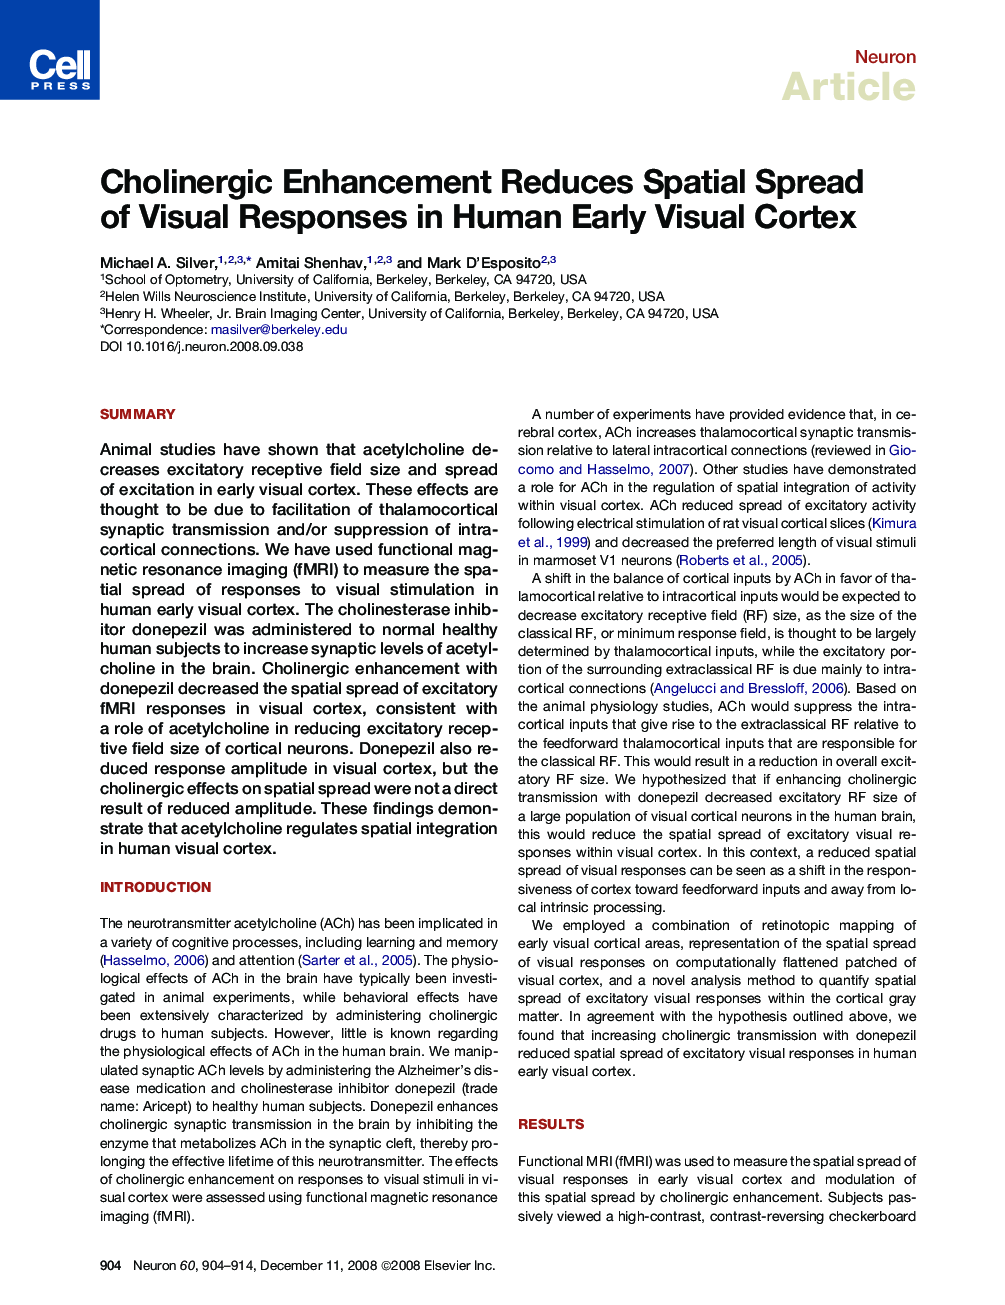 Cholinergic Enhancement Reduces Spatial Spread of Visual Responses in Human Early Visual Cortex